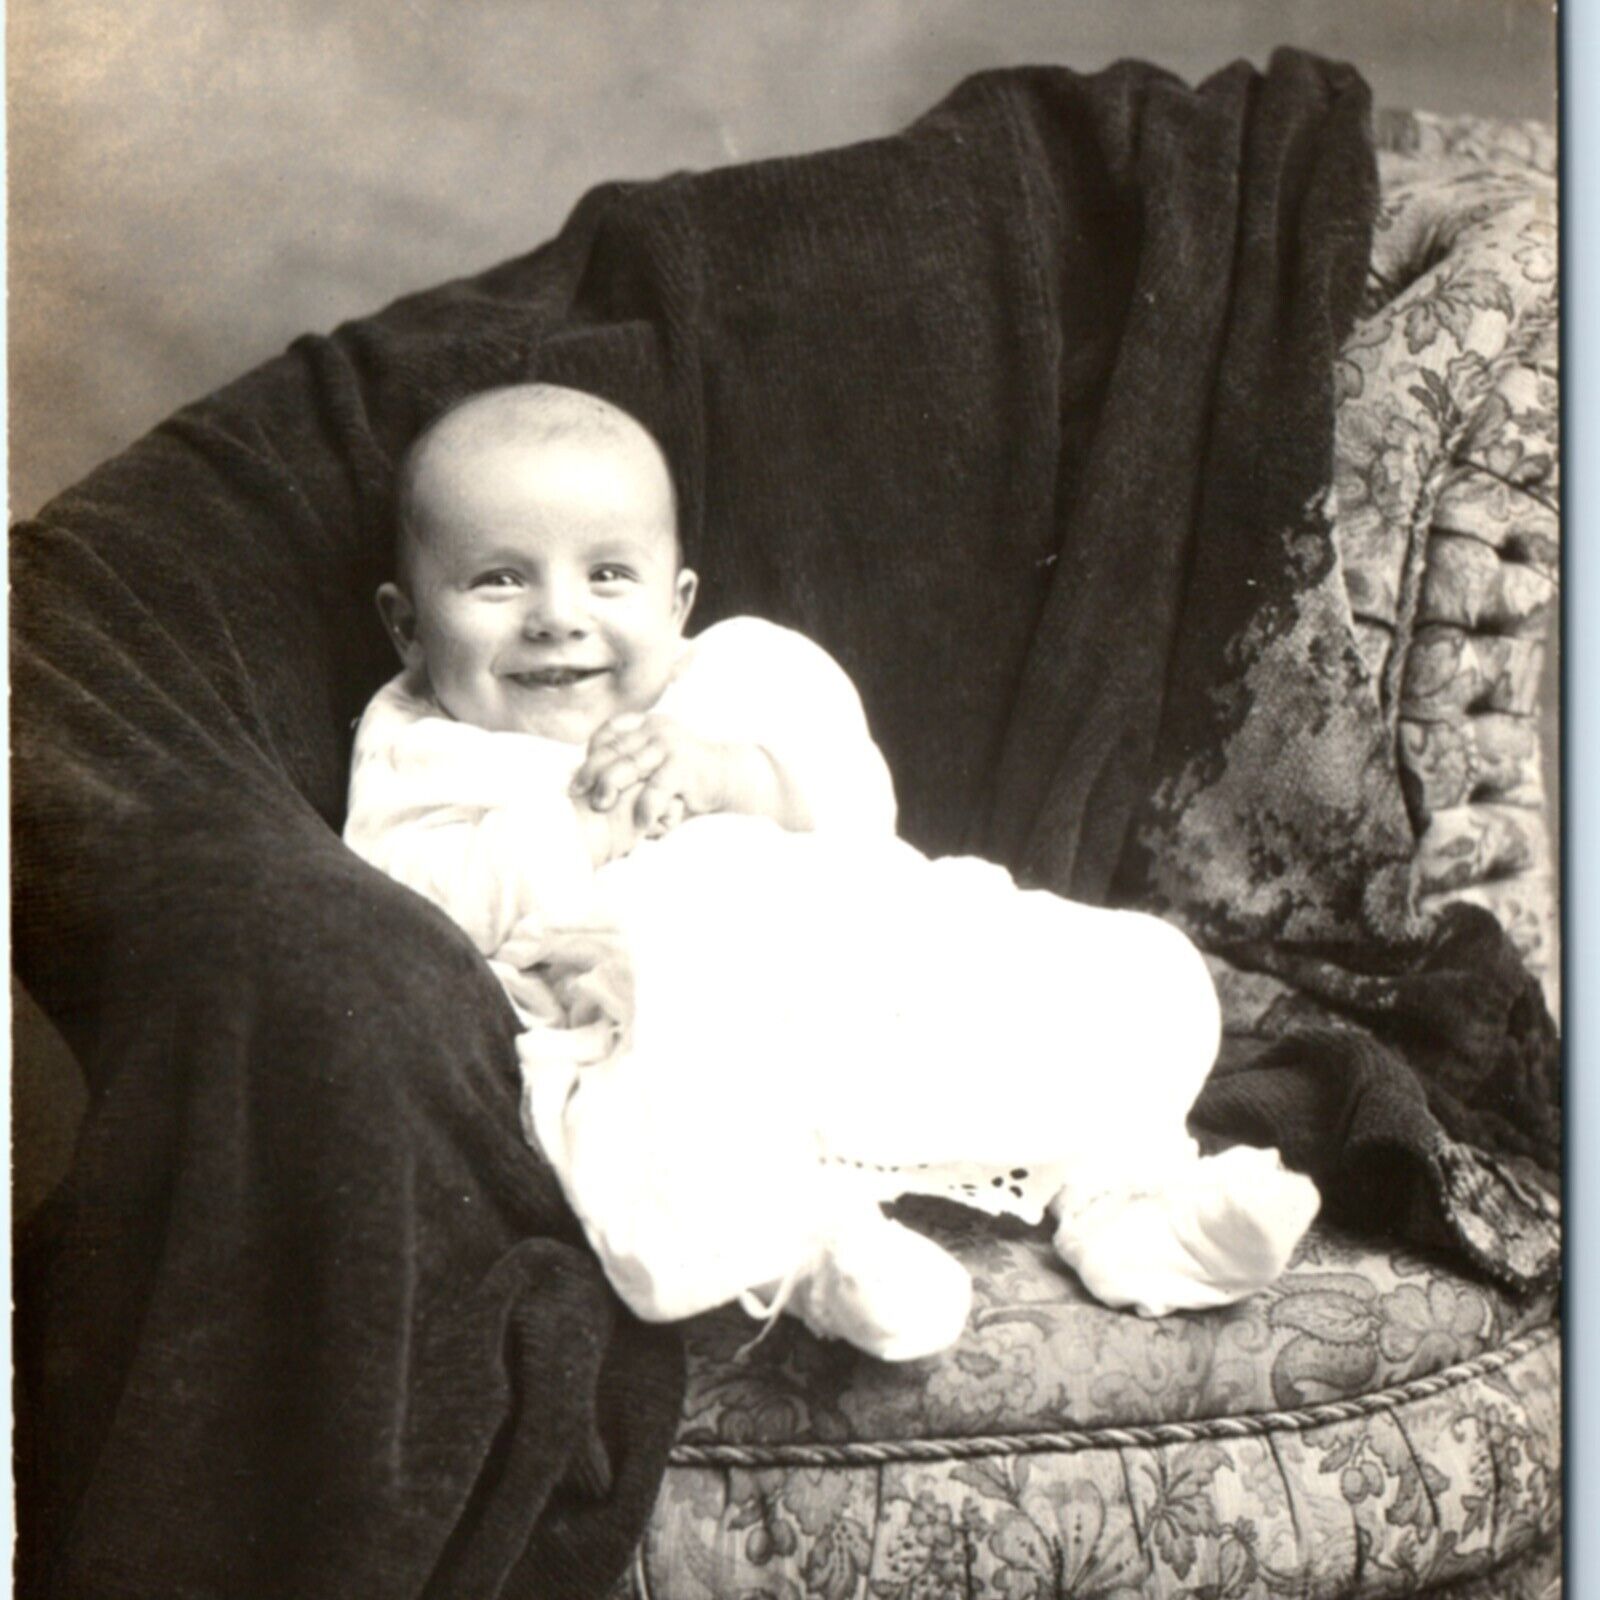 ID'd c1910s Cute Smile Baby Boy RPPC Laughing Real Photo Harold K. Grove A134